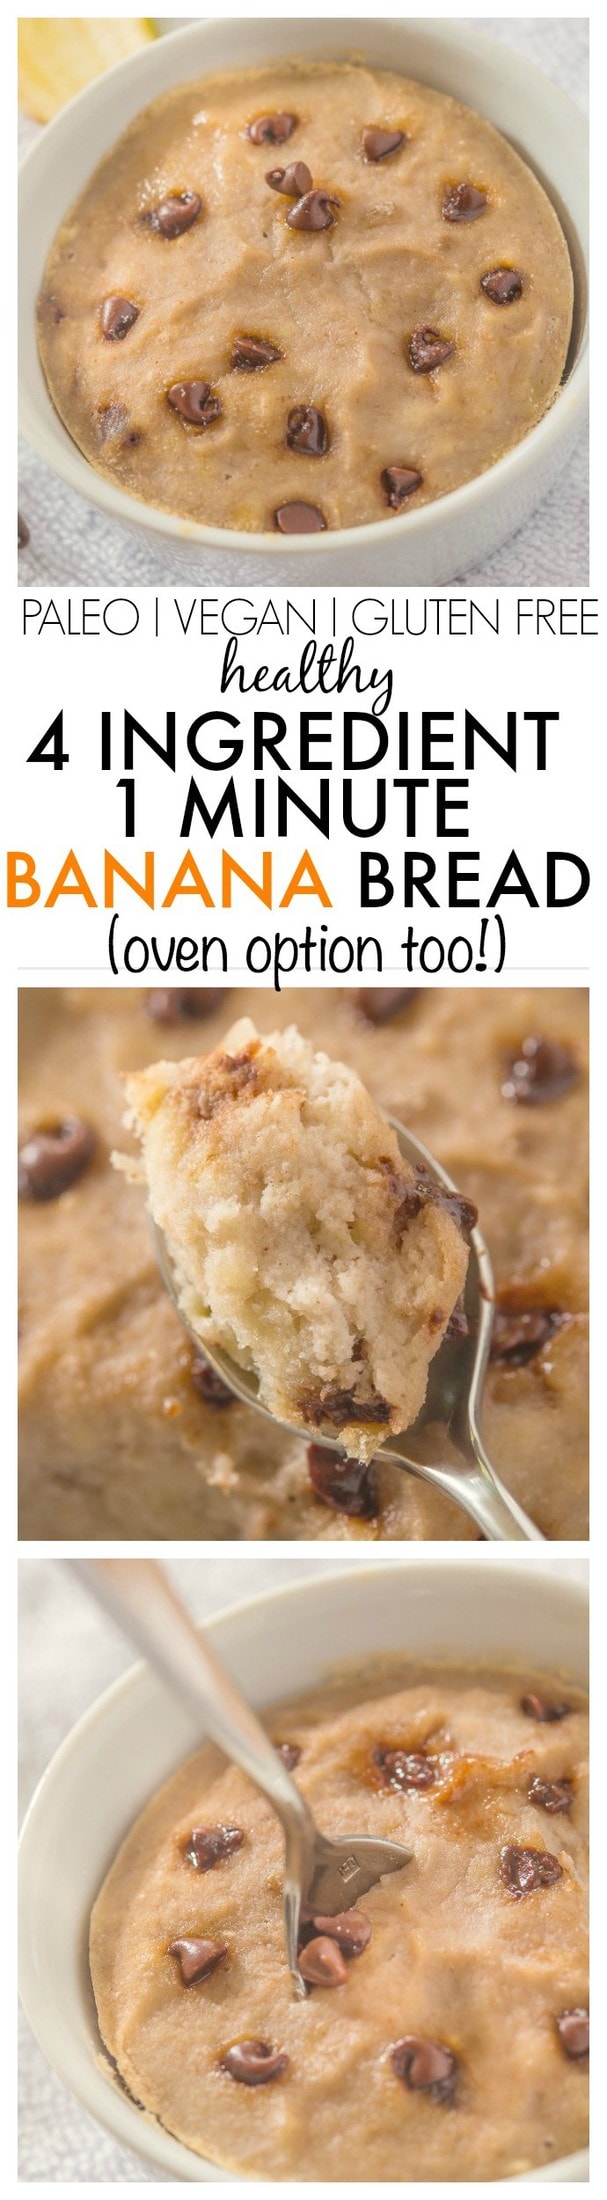 Healthy 1 Minute Banana Bread using 4 ingredients and SO moist, gooey yet tender on the outside- It has NO butter, oil, sugar or white flour!- There is an oven option too! {vegan, gluten free, paleo recipe}